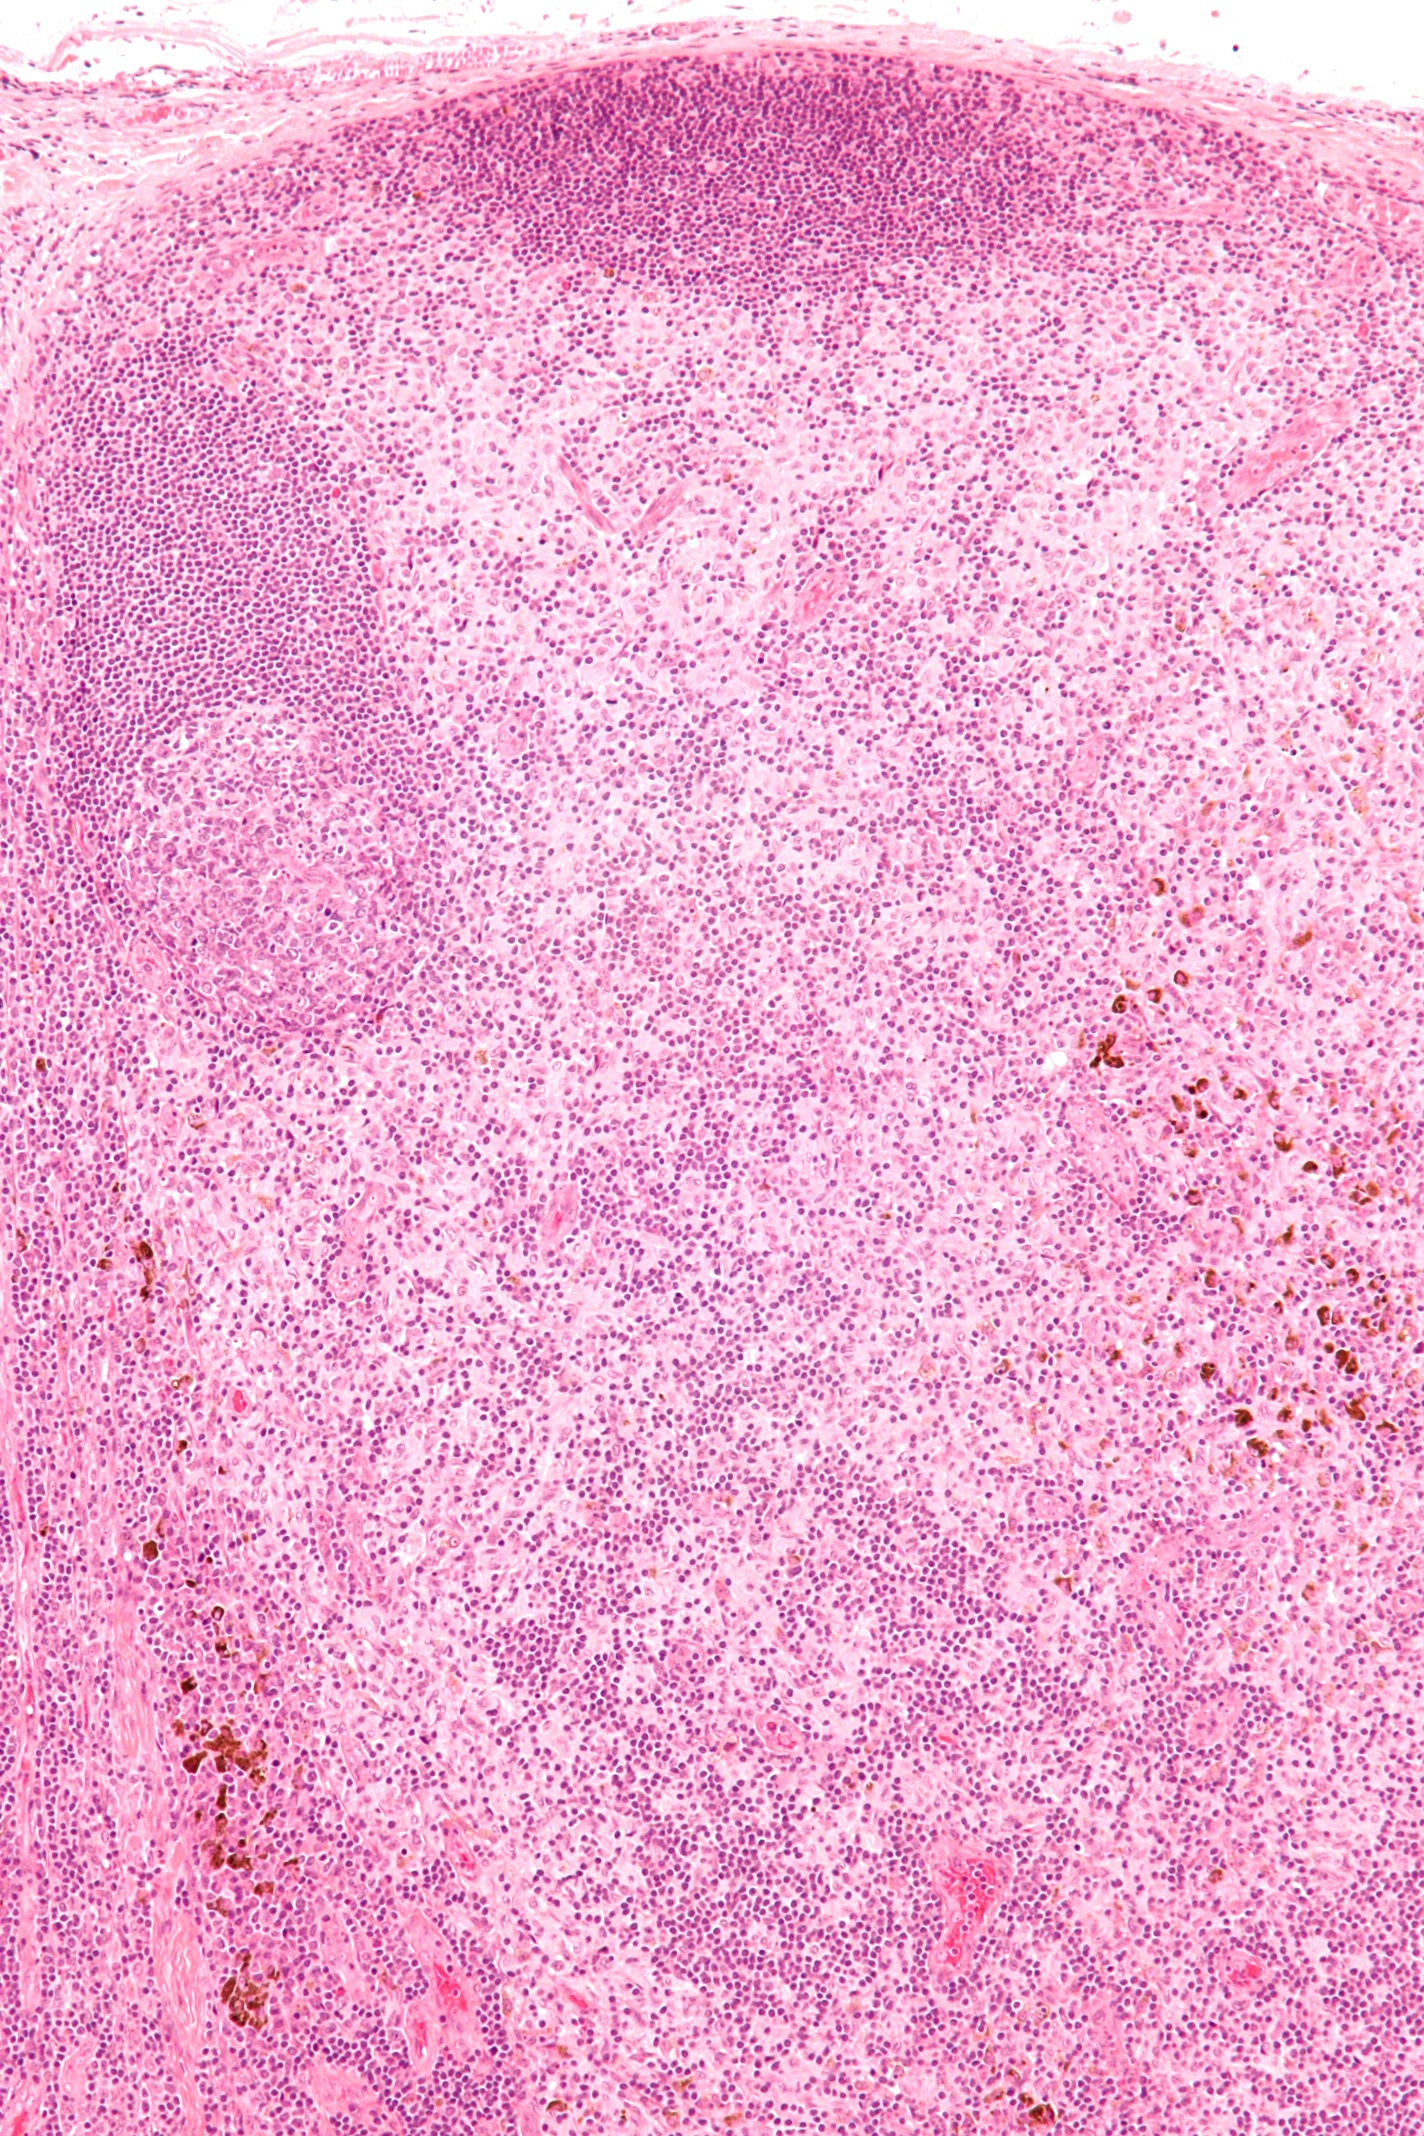 Micrograph of dermatopathic lymphadenopathy, a type of lymphadenopathy. H&E stain